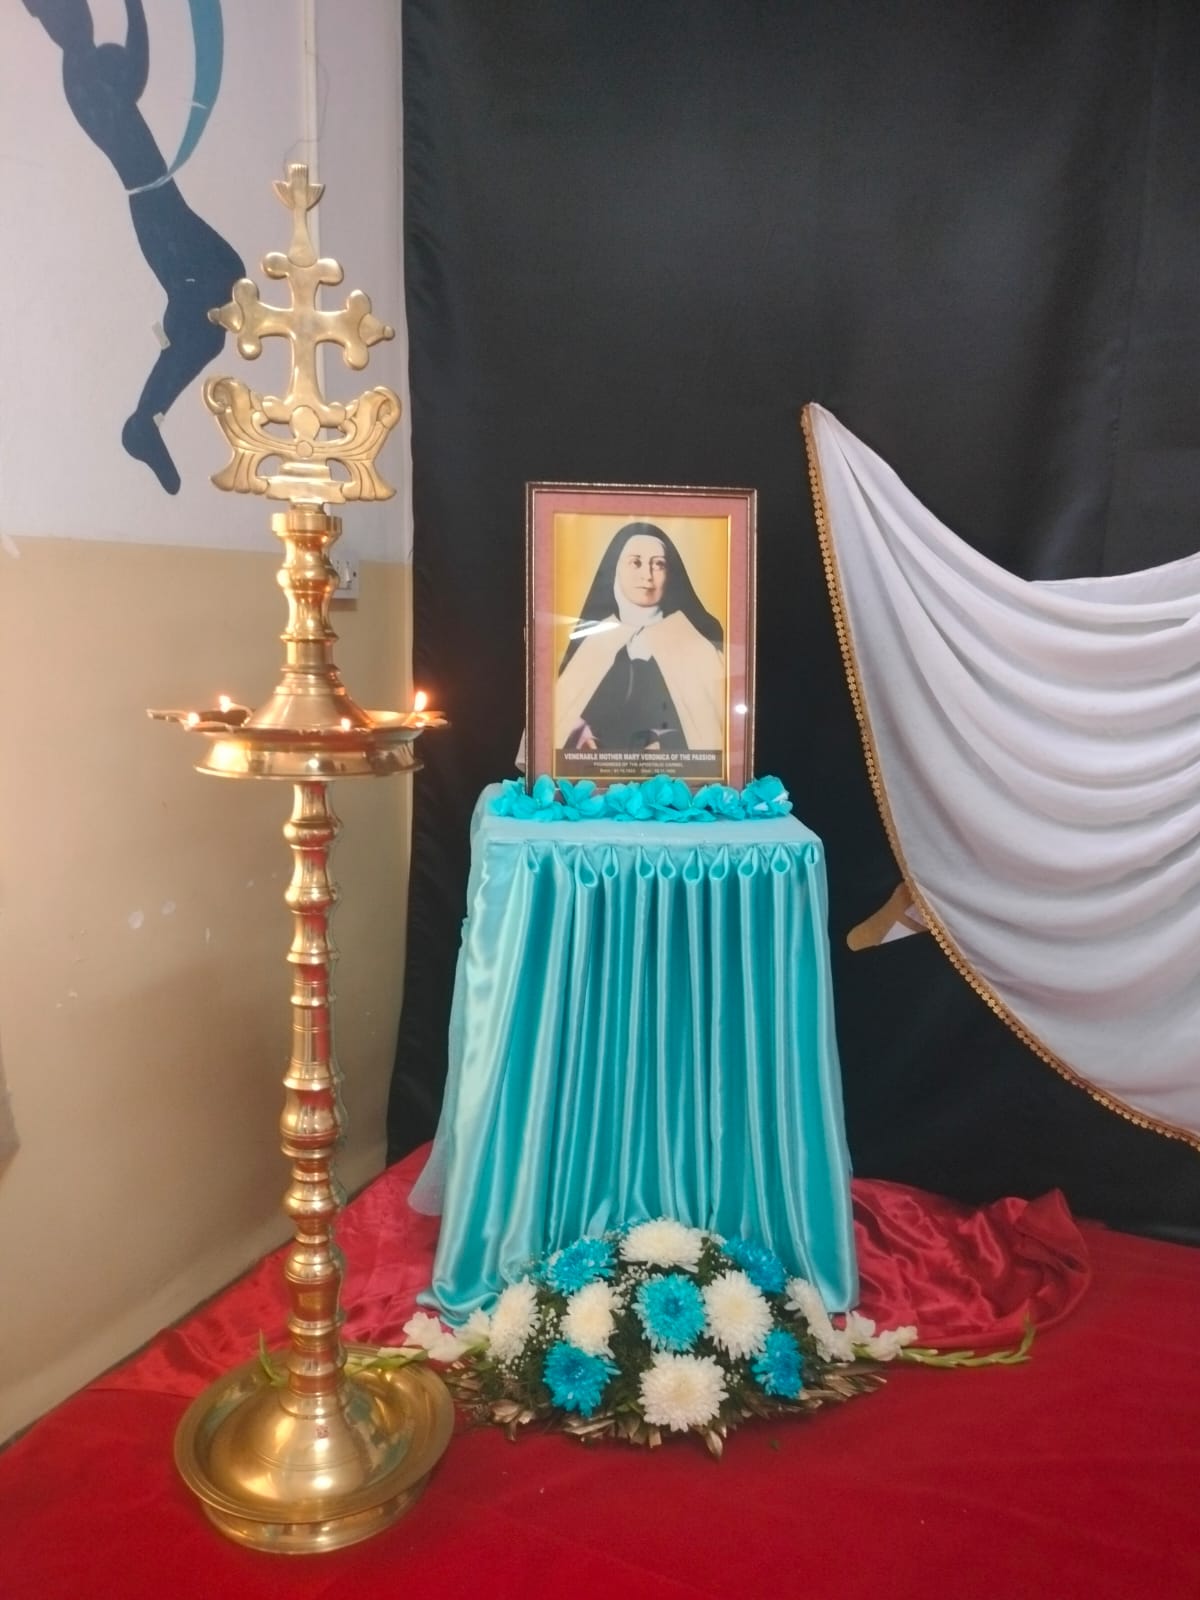 Exhibition on the Life of Our Foundress Ven. Mother Veronica Image